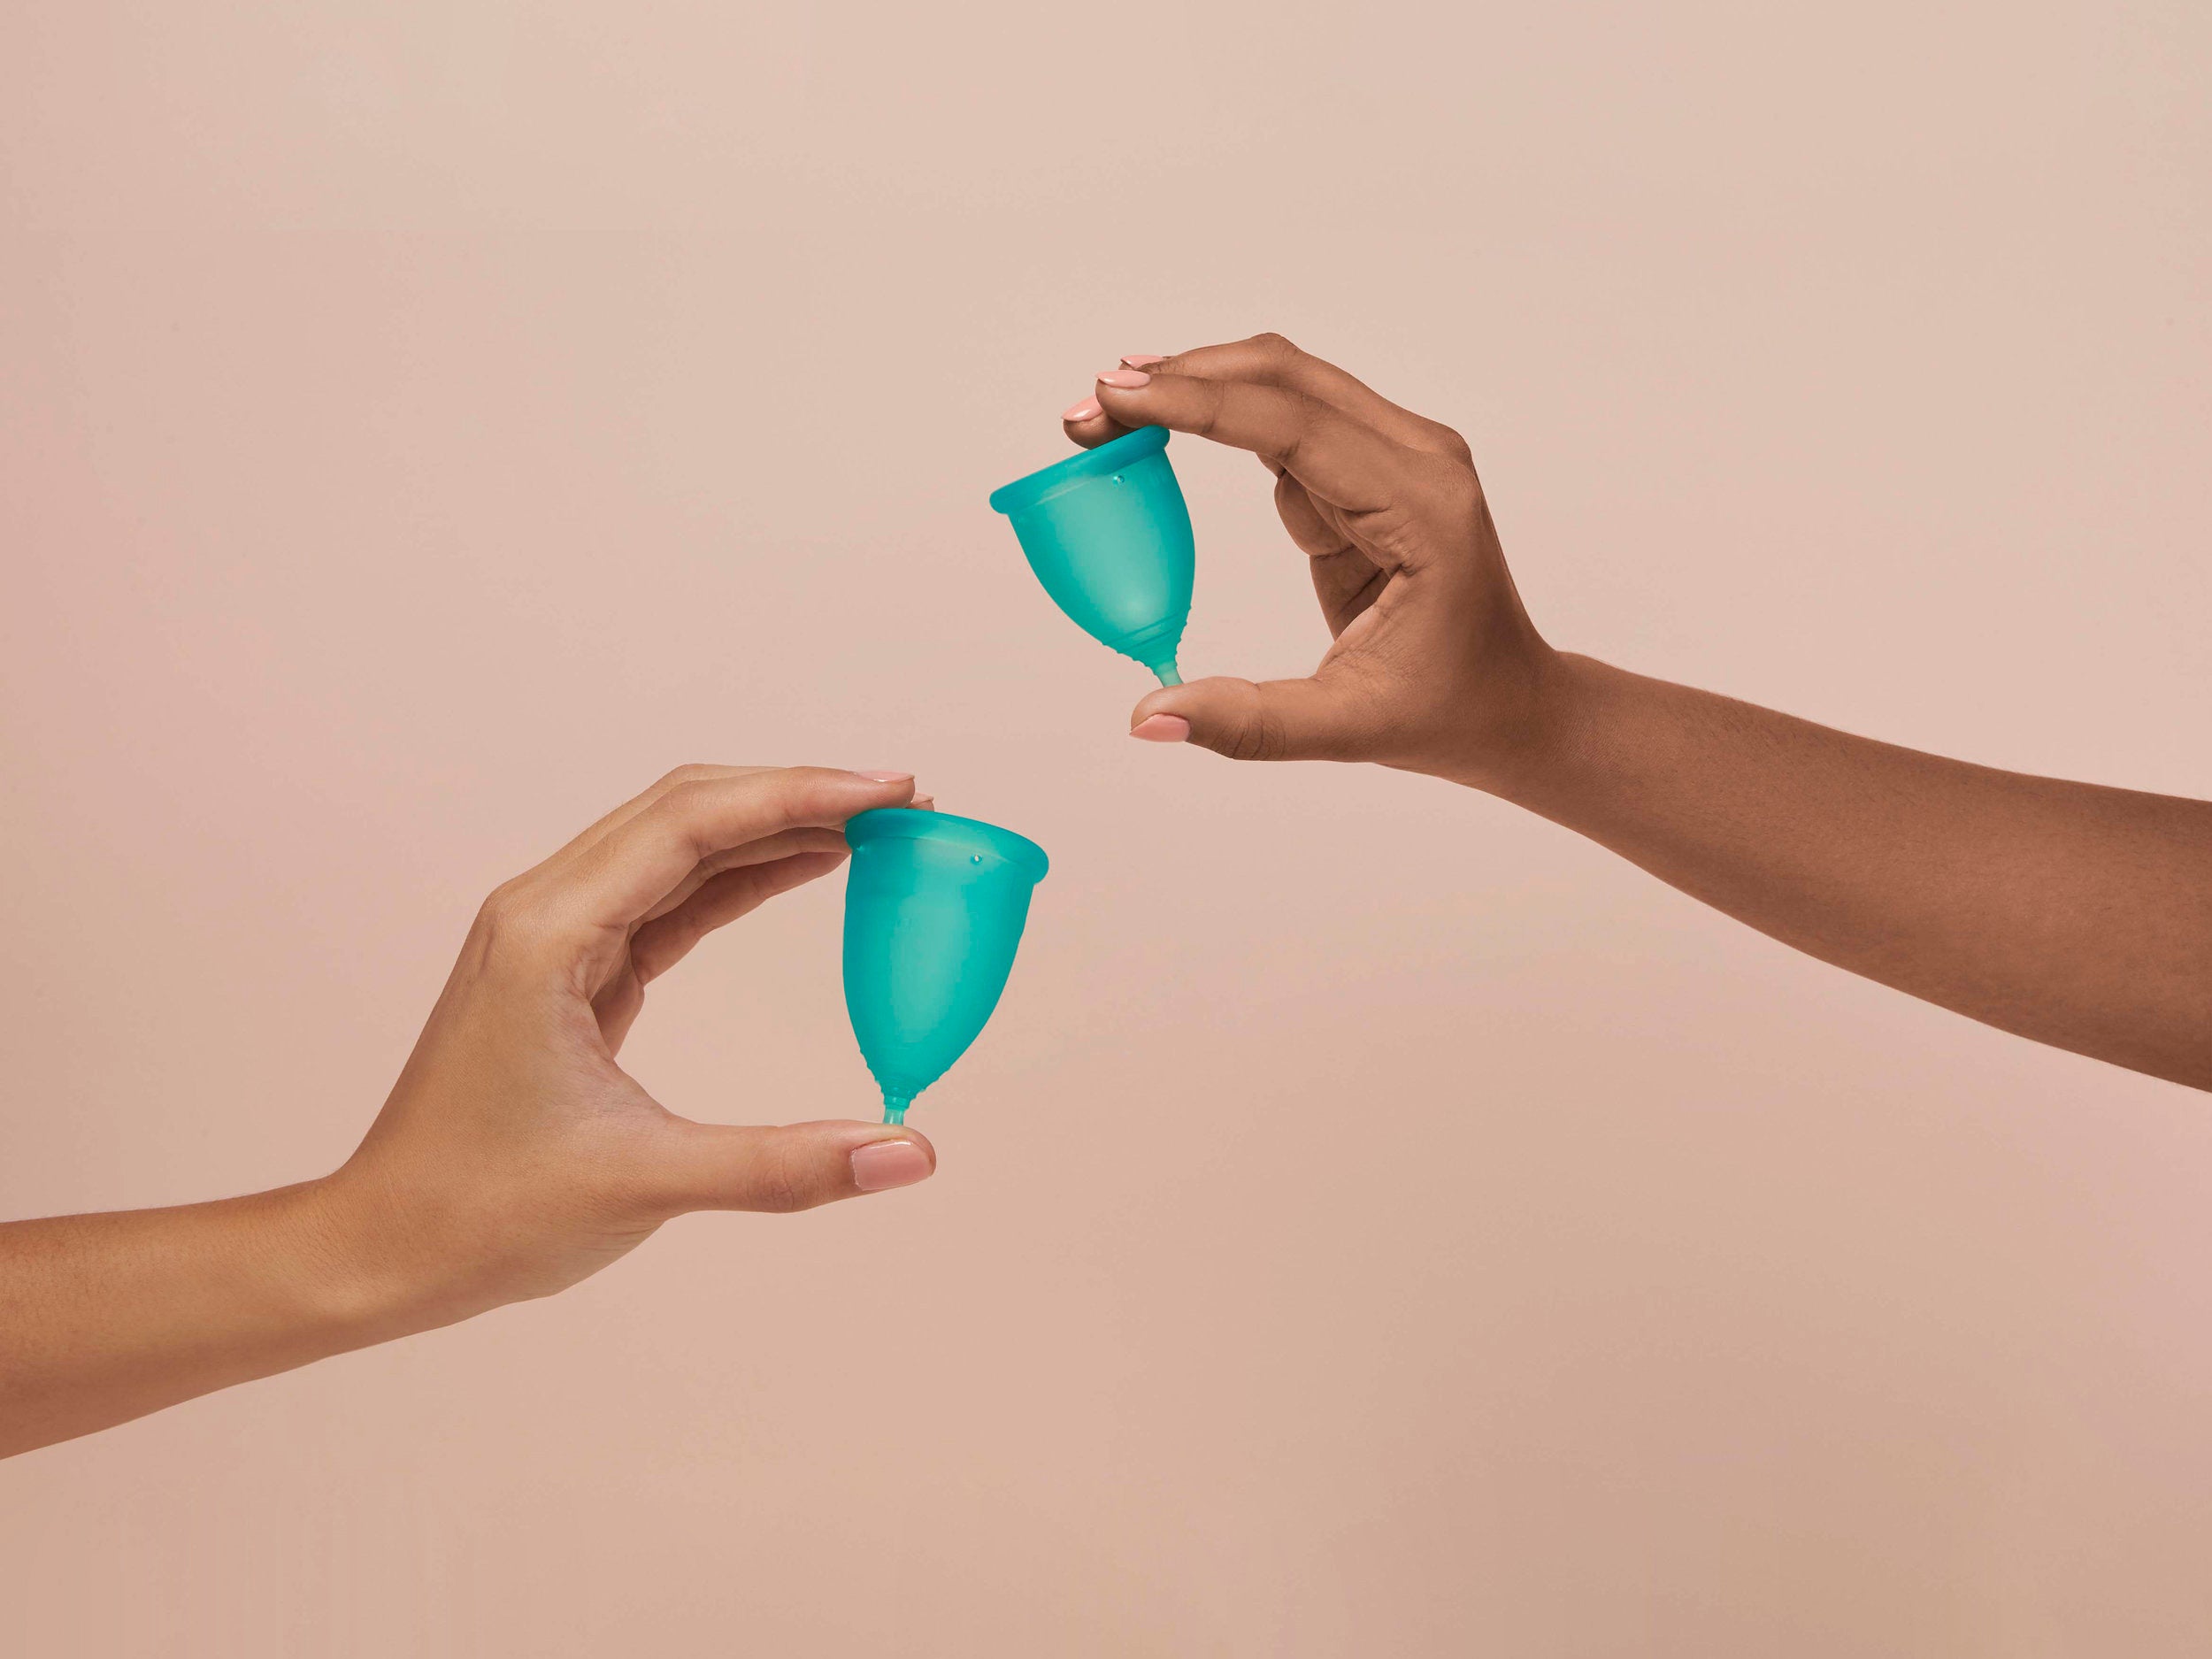 Menstrual Cup - LM